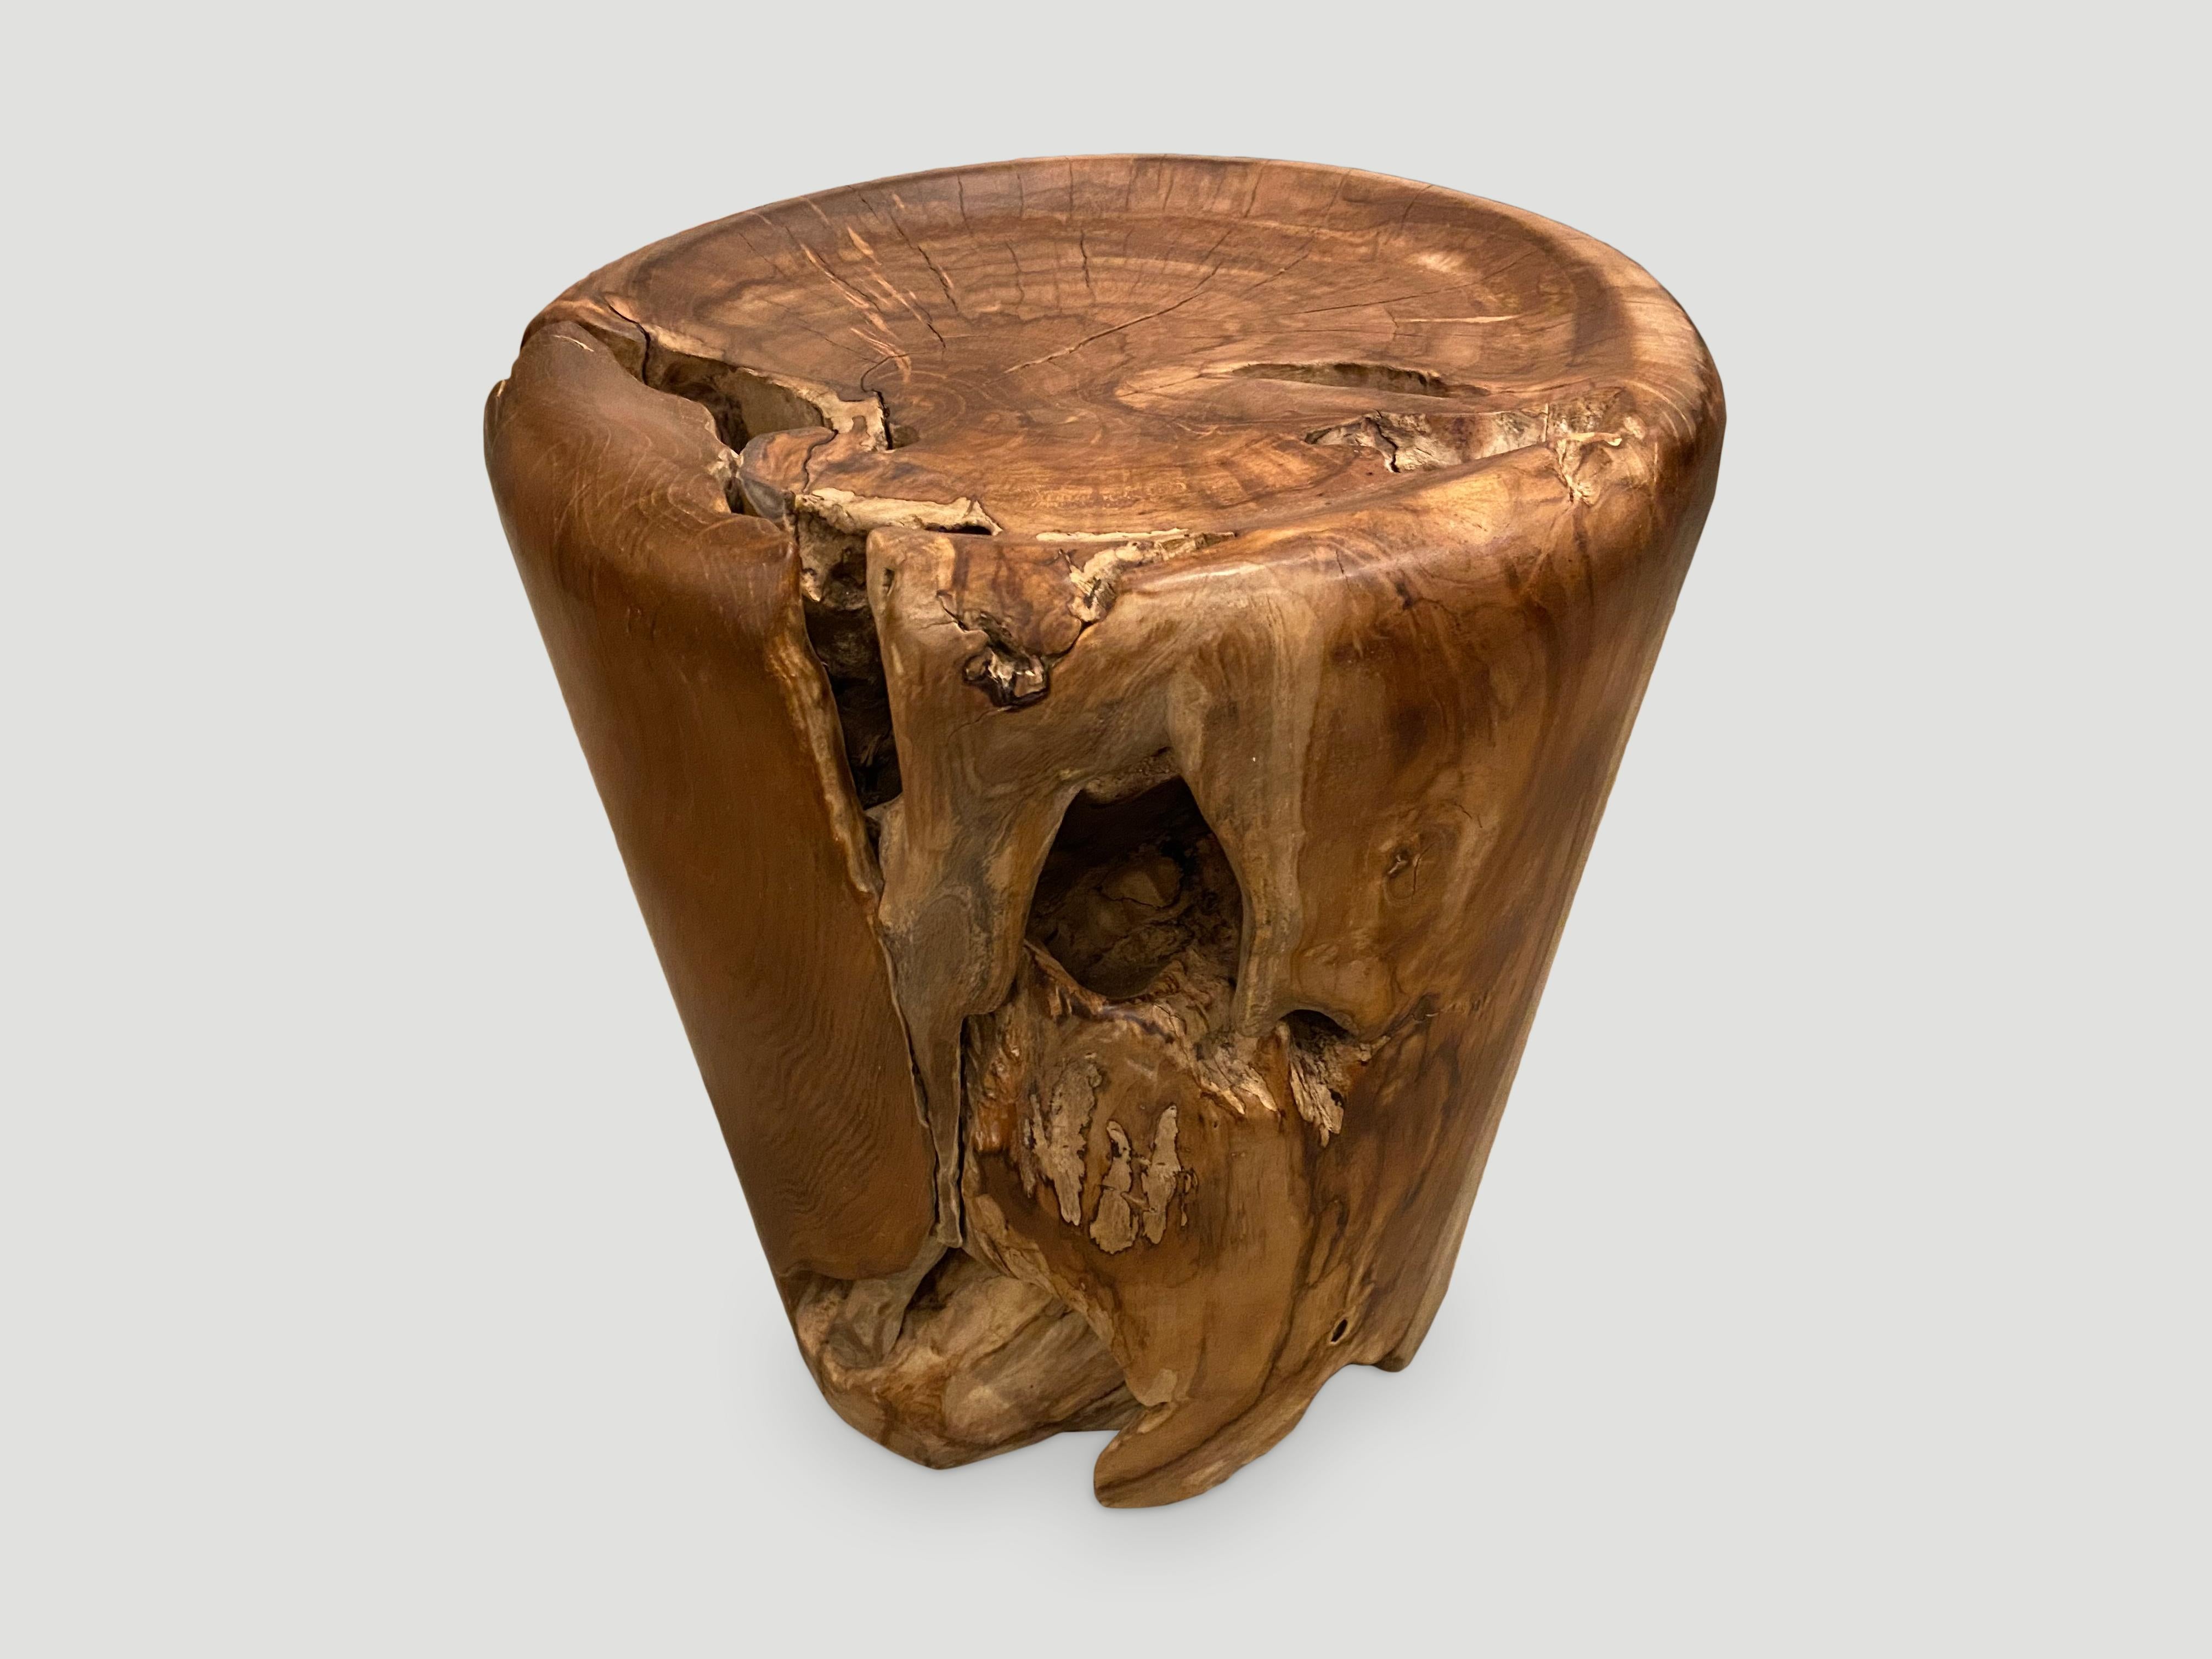 Contemporary Andrianna Shamaris Organic Natural Teak Wood Tray Side Table For Sale